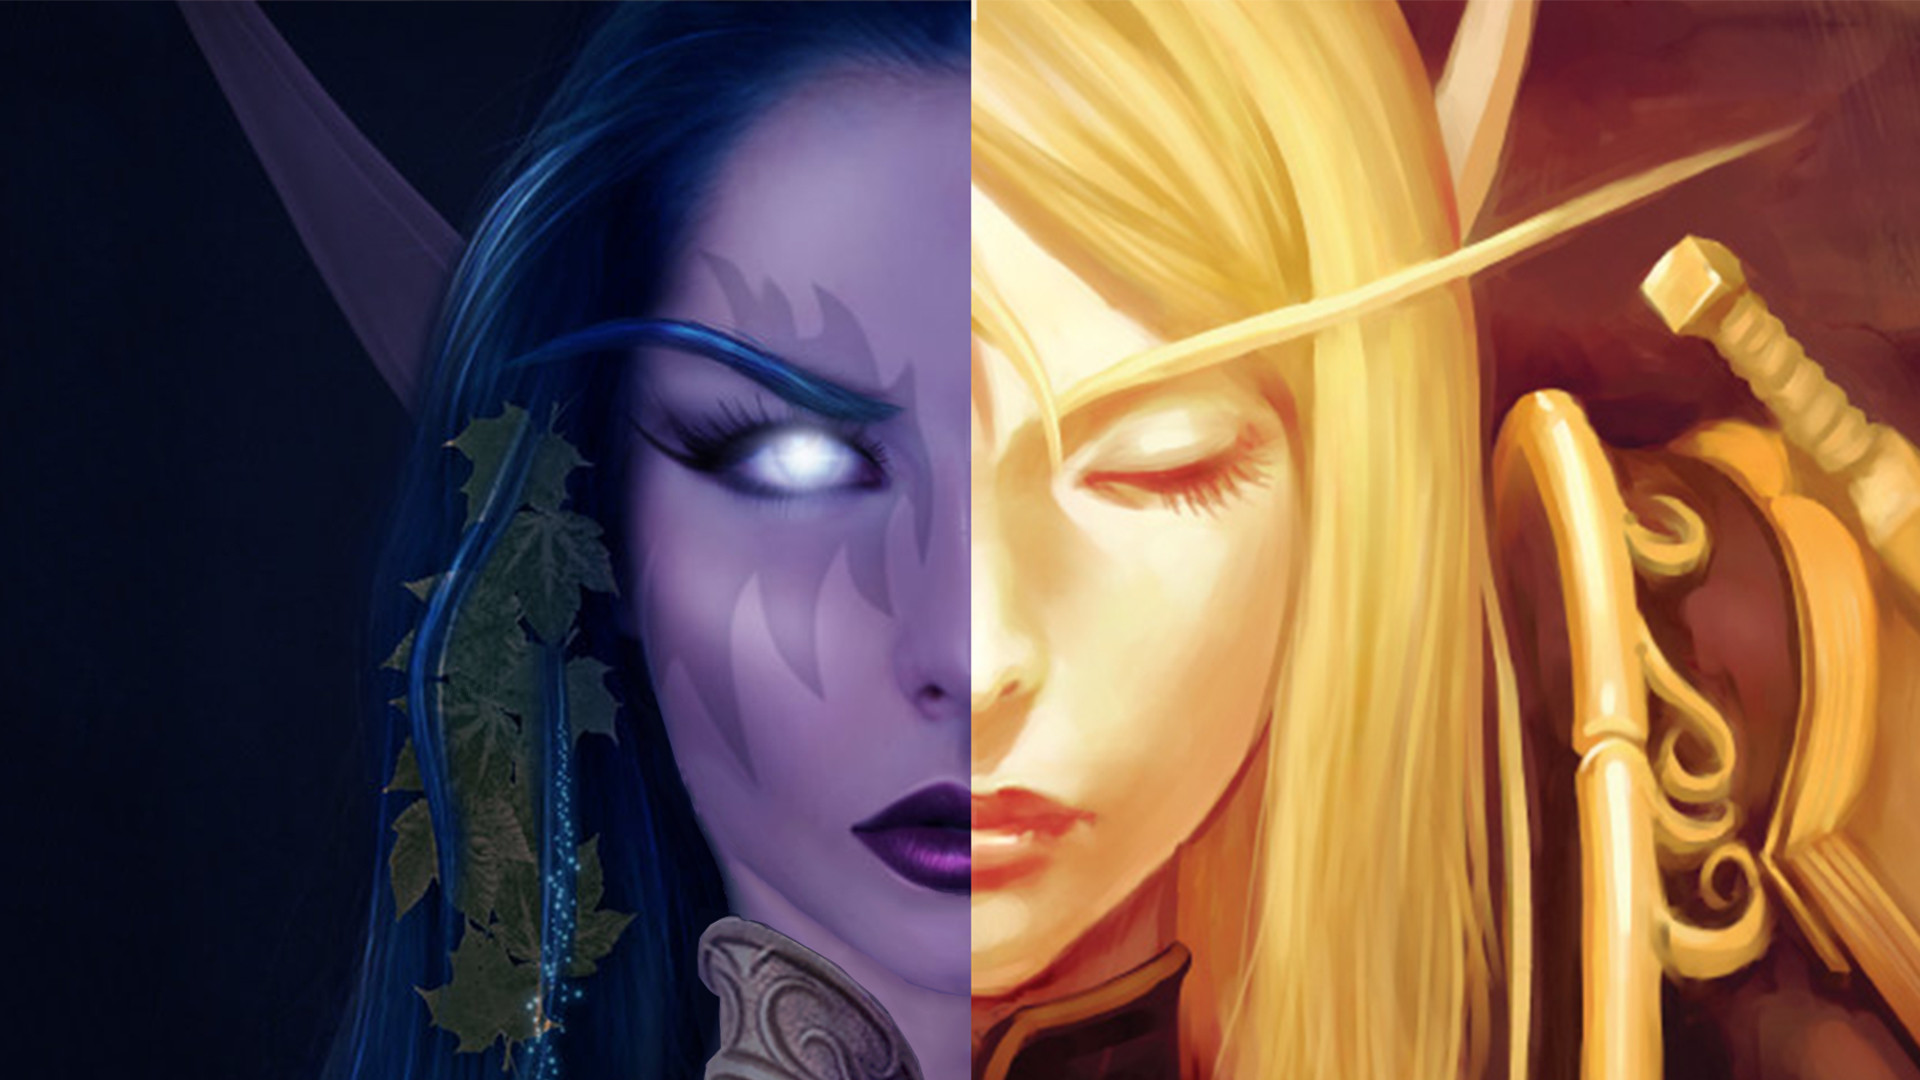 1920x1080 Night/Blood Elf ALL Crossover Wallpapers. - Album On Imgur